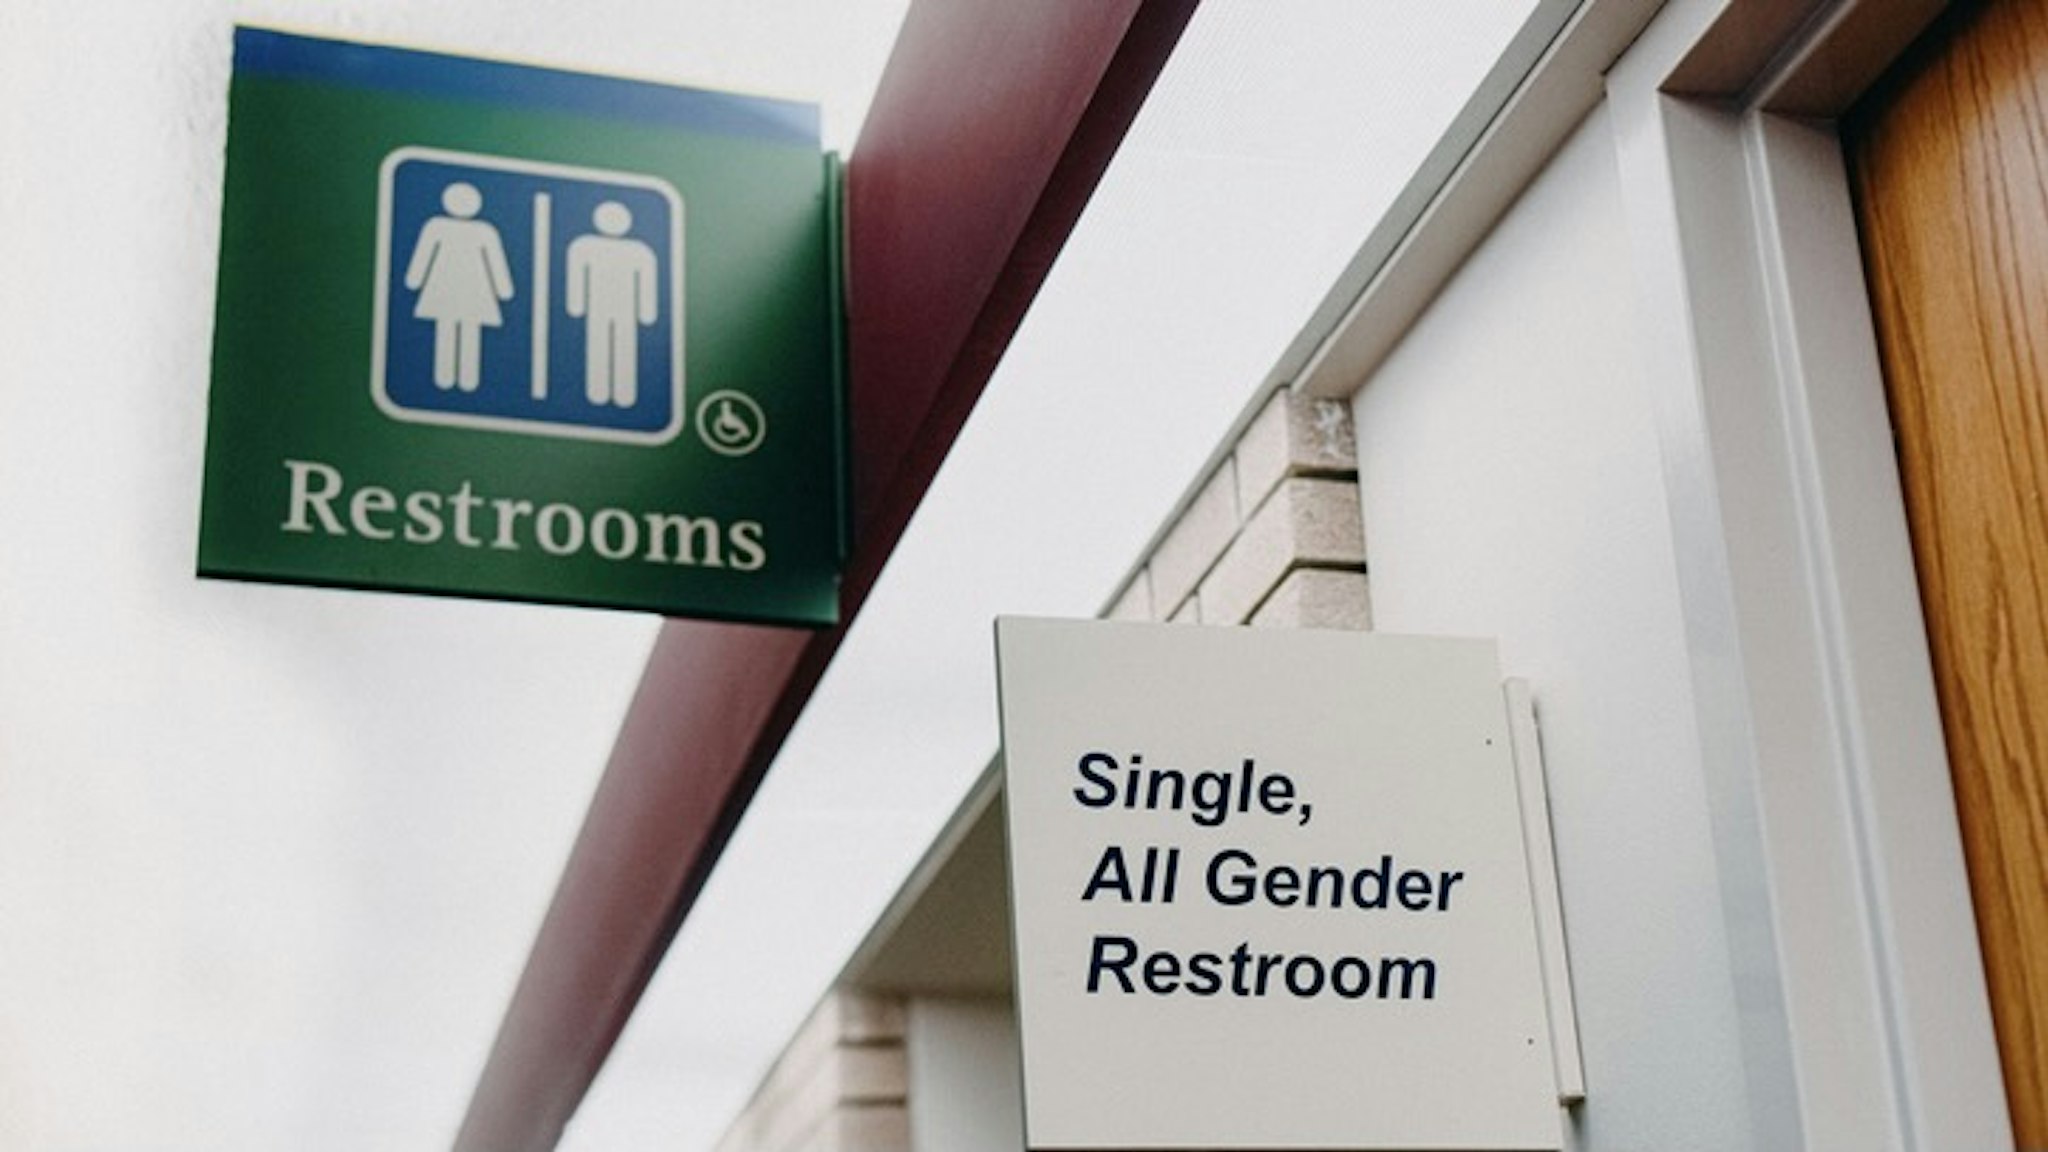 All Gender Restroom Sign - stock photo All gender restroom sign. Stefania Pelfini, La Waziya Photography via Getty Images